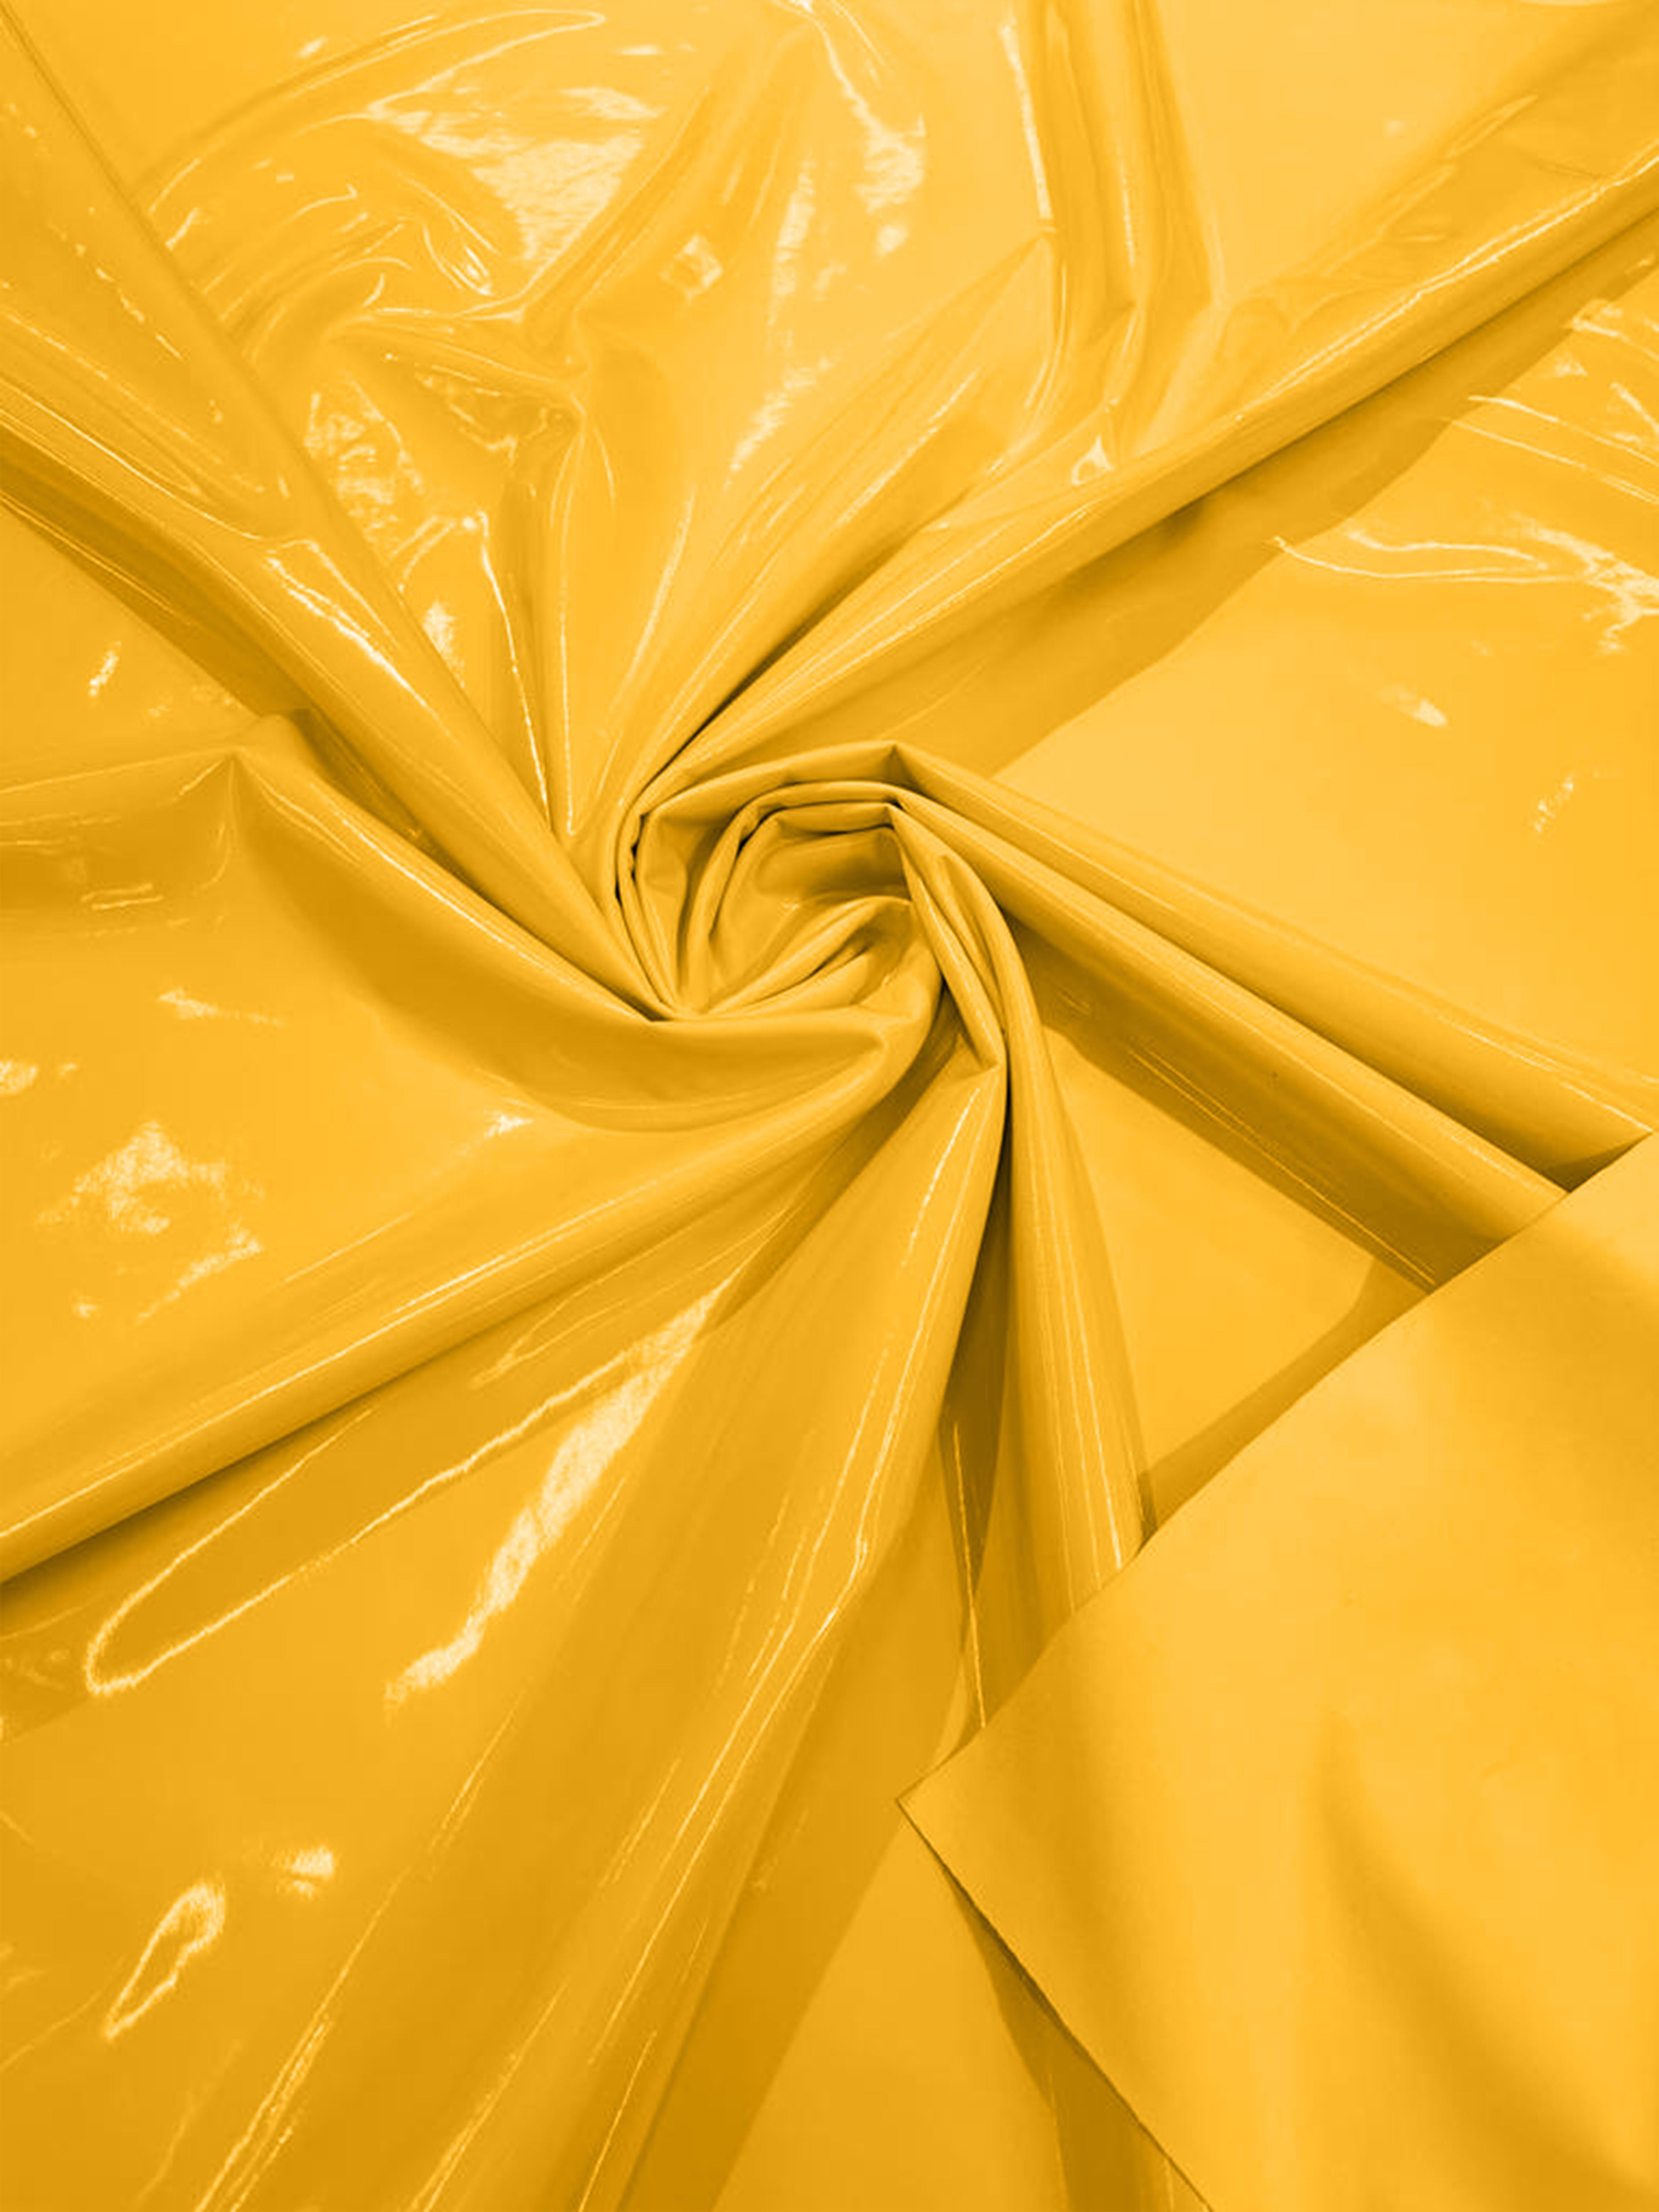 Yellow Spandex Shiny Vinyl Fabric (Latex Stretch) - Sold By The Yard